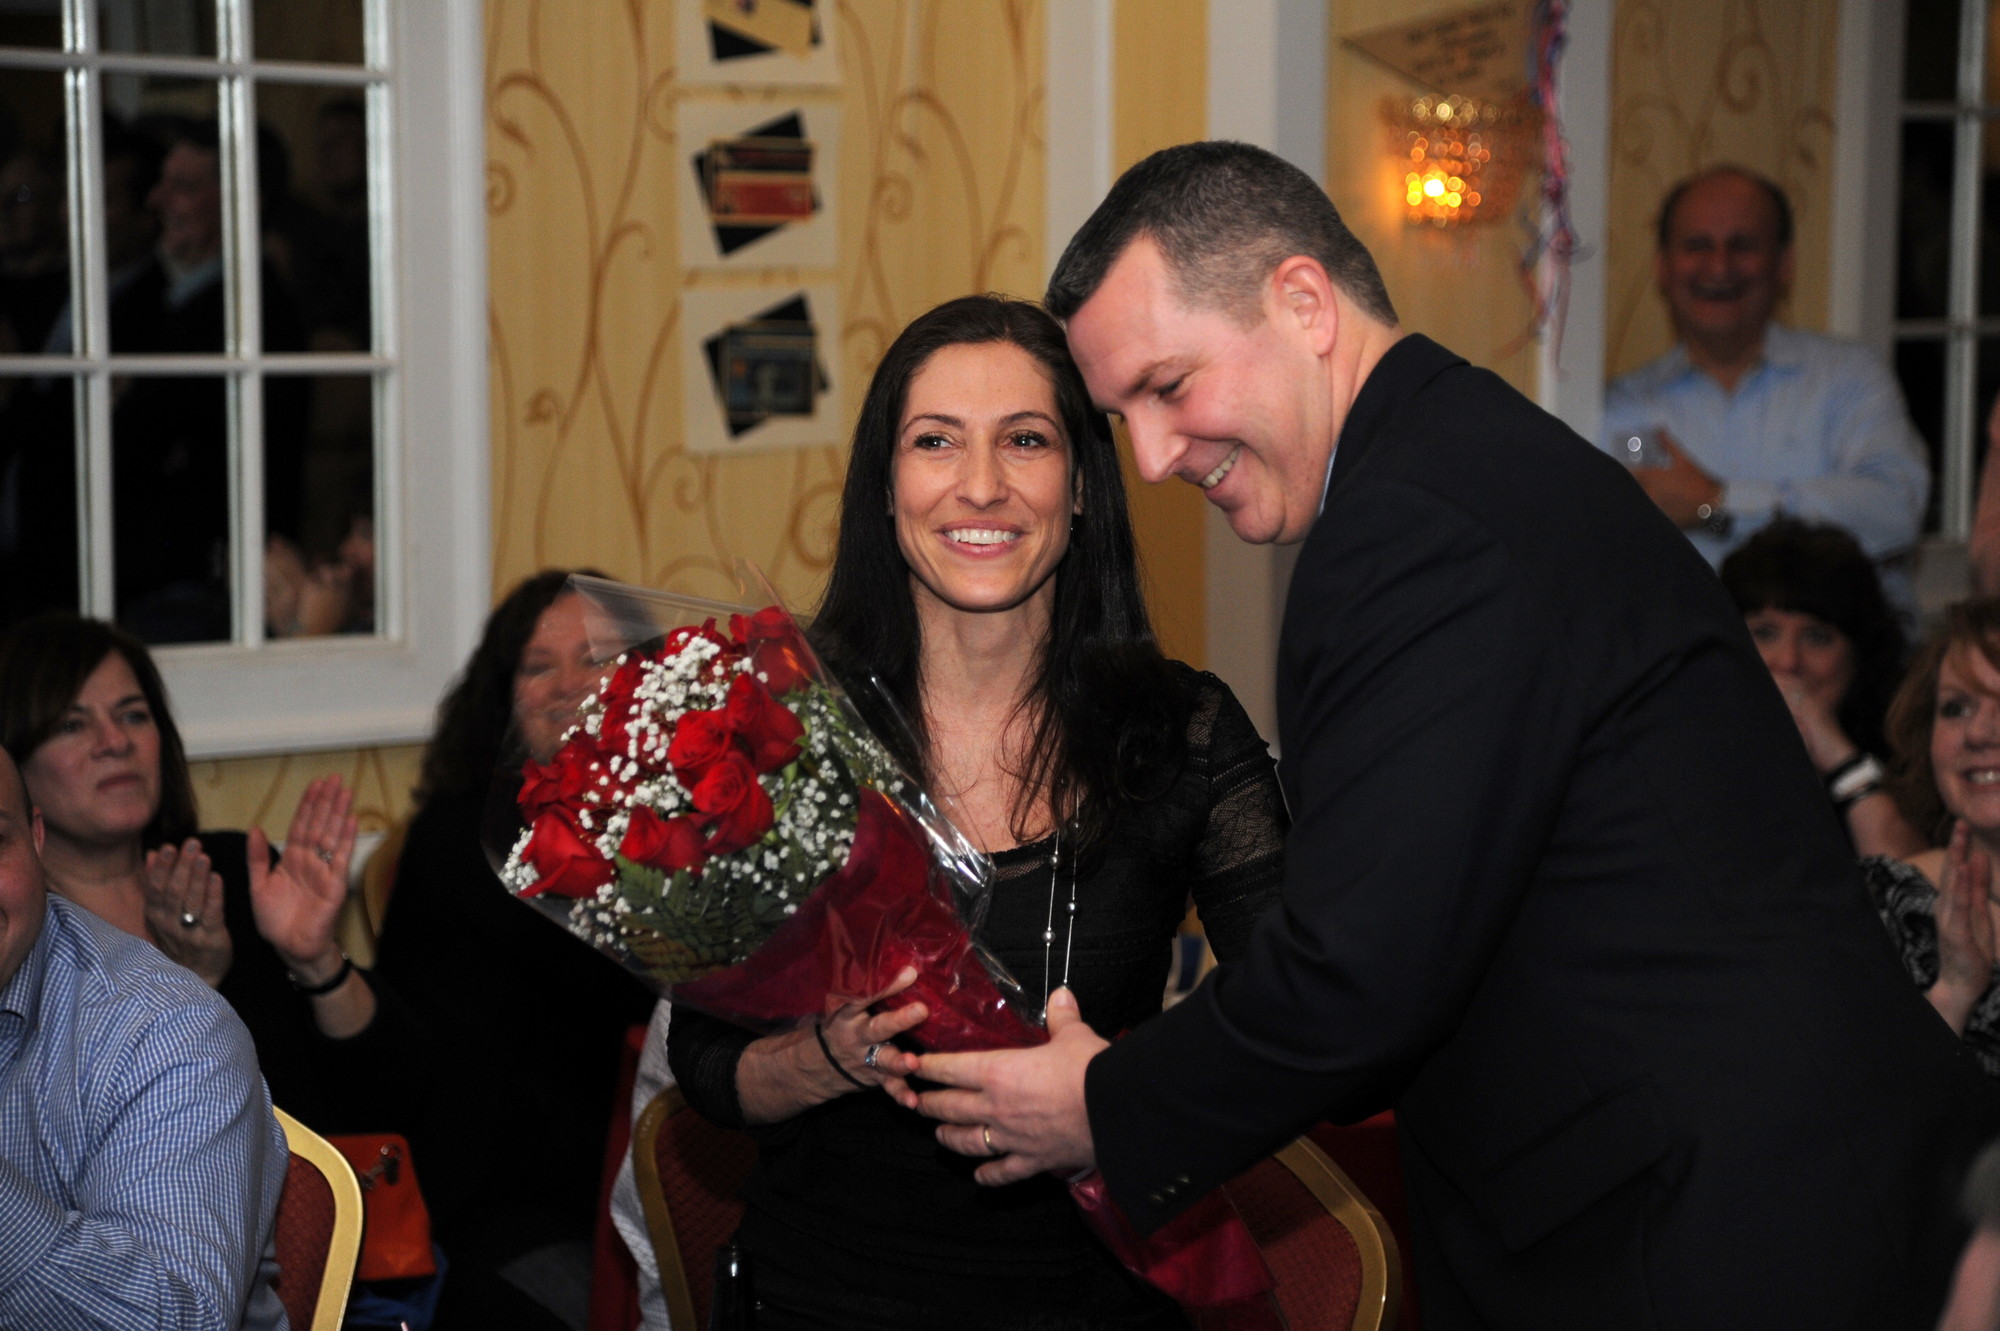 Coach Greg Brennan, one of the evening’s honorees, made sure to recognize his wife, Tara, with a bouquet of roses.